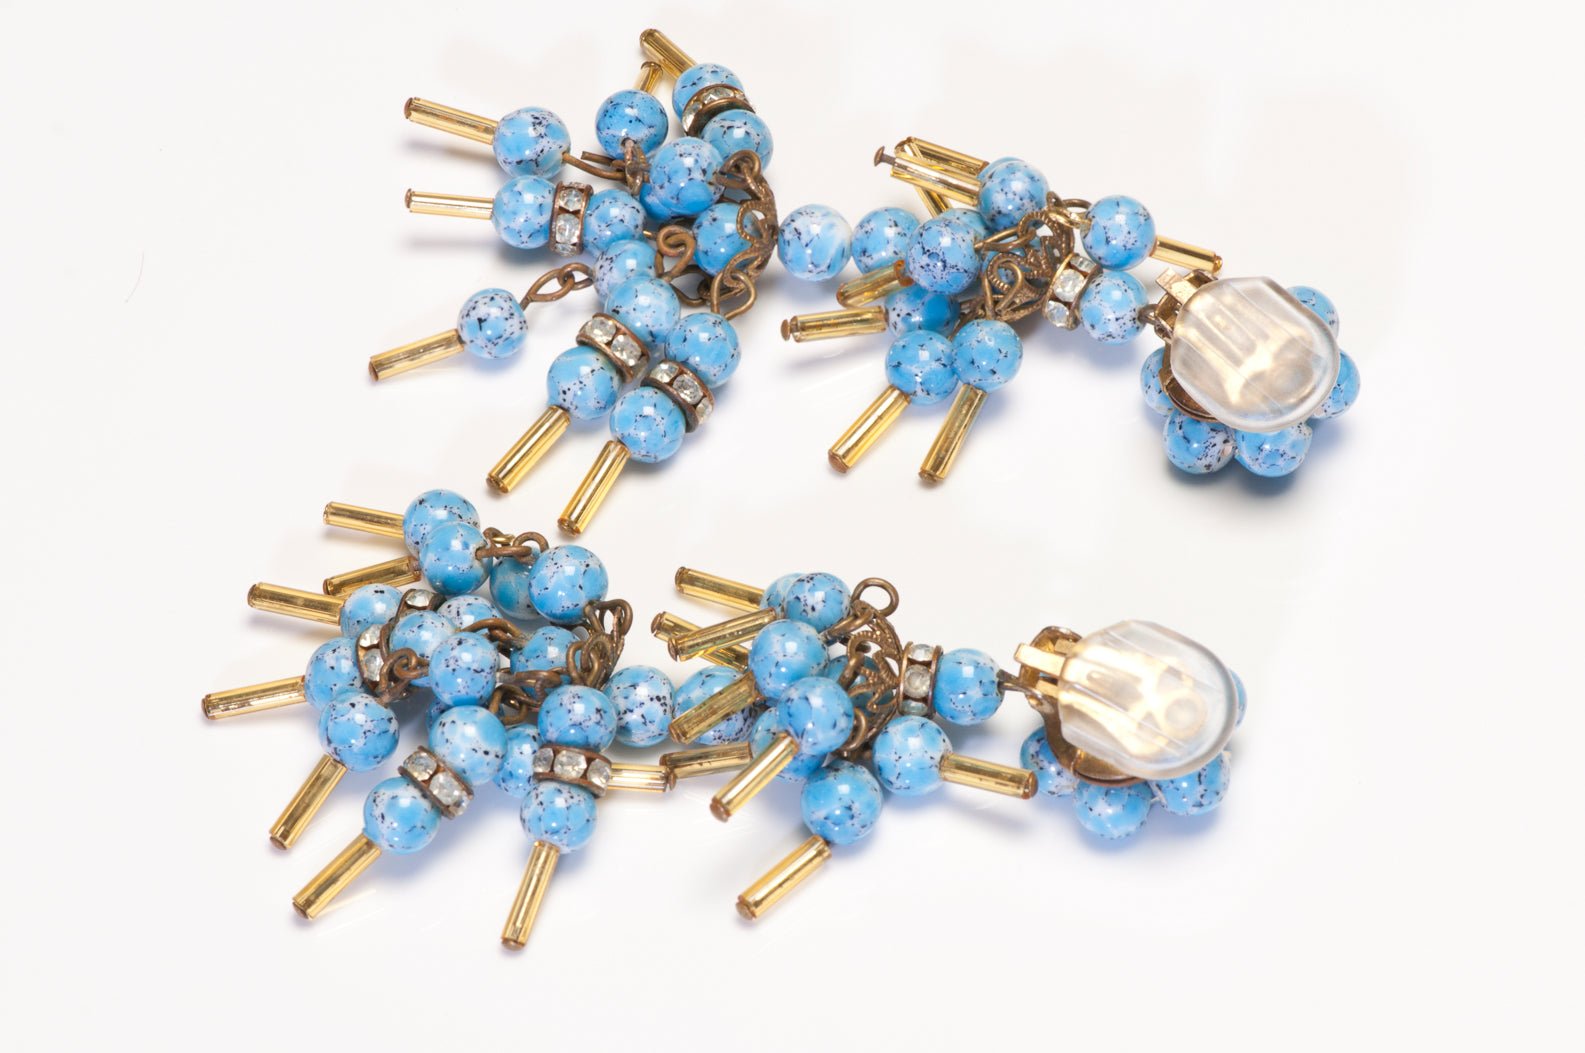 Vintage 1930's French Blue Glass Beads Long Drop Earrings